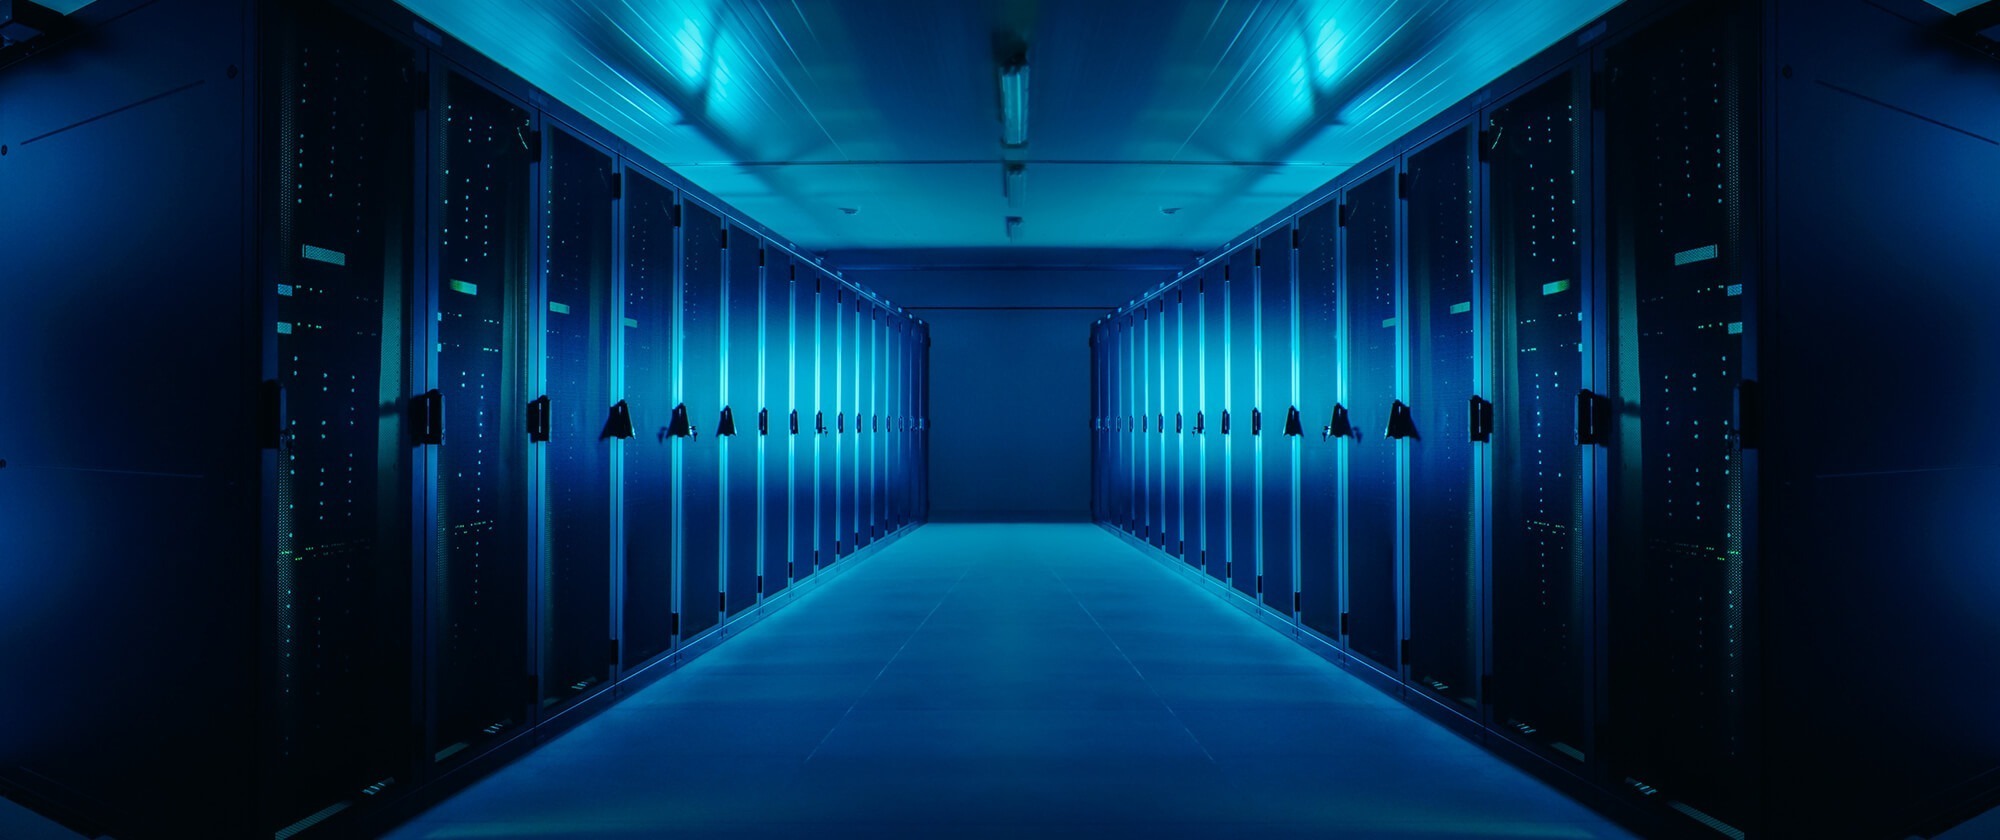 Large server room with a blue filter